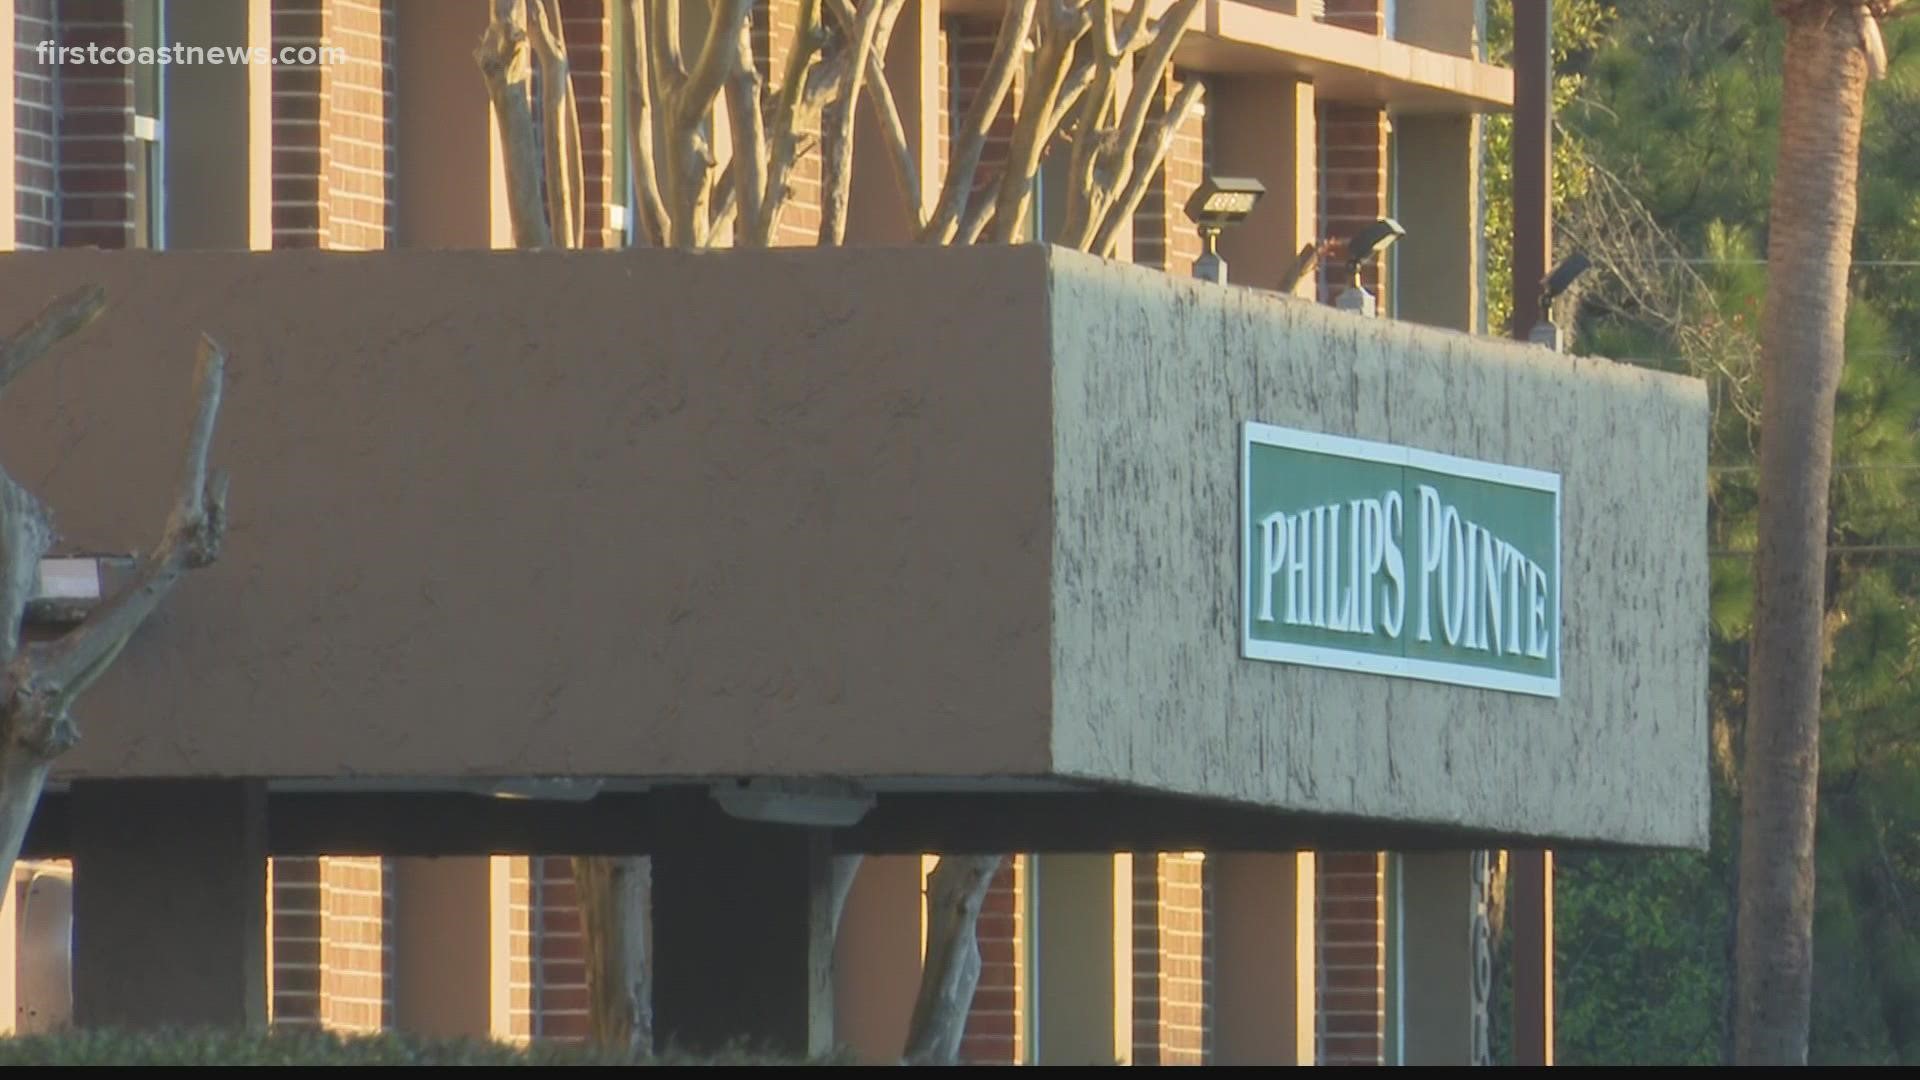 Police said the robbery and shooting took place at Philips Pointe Apartments, and the victim then walked to a nearby parking lot, where they were treated.